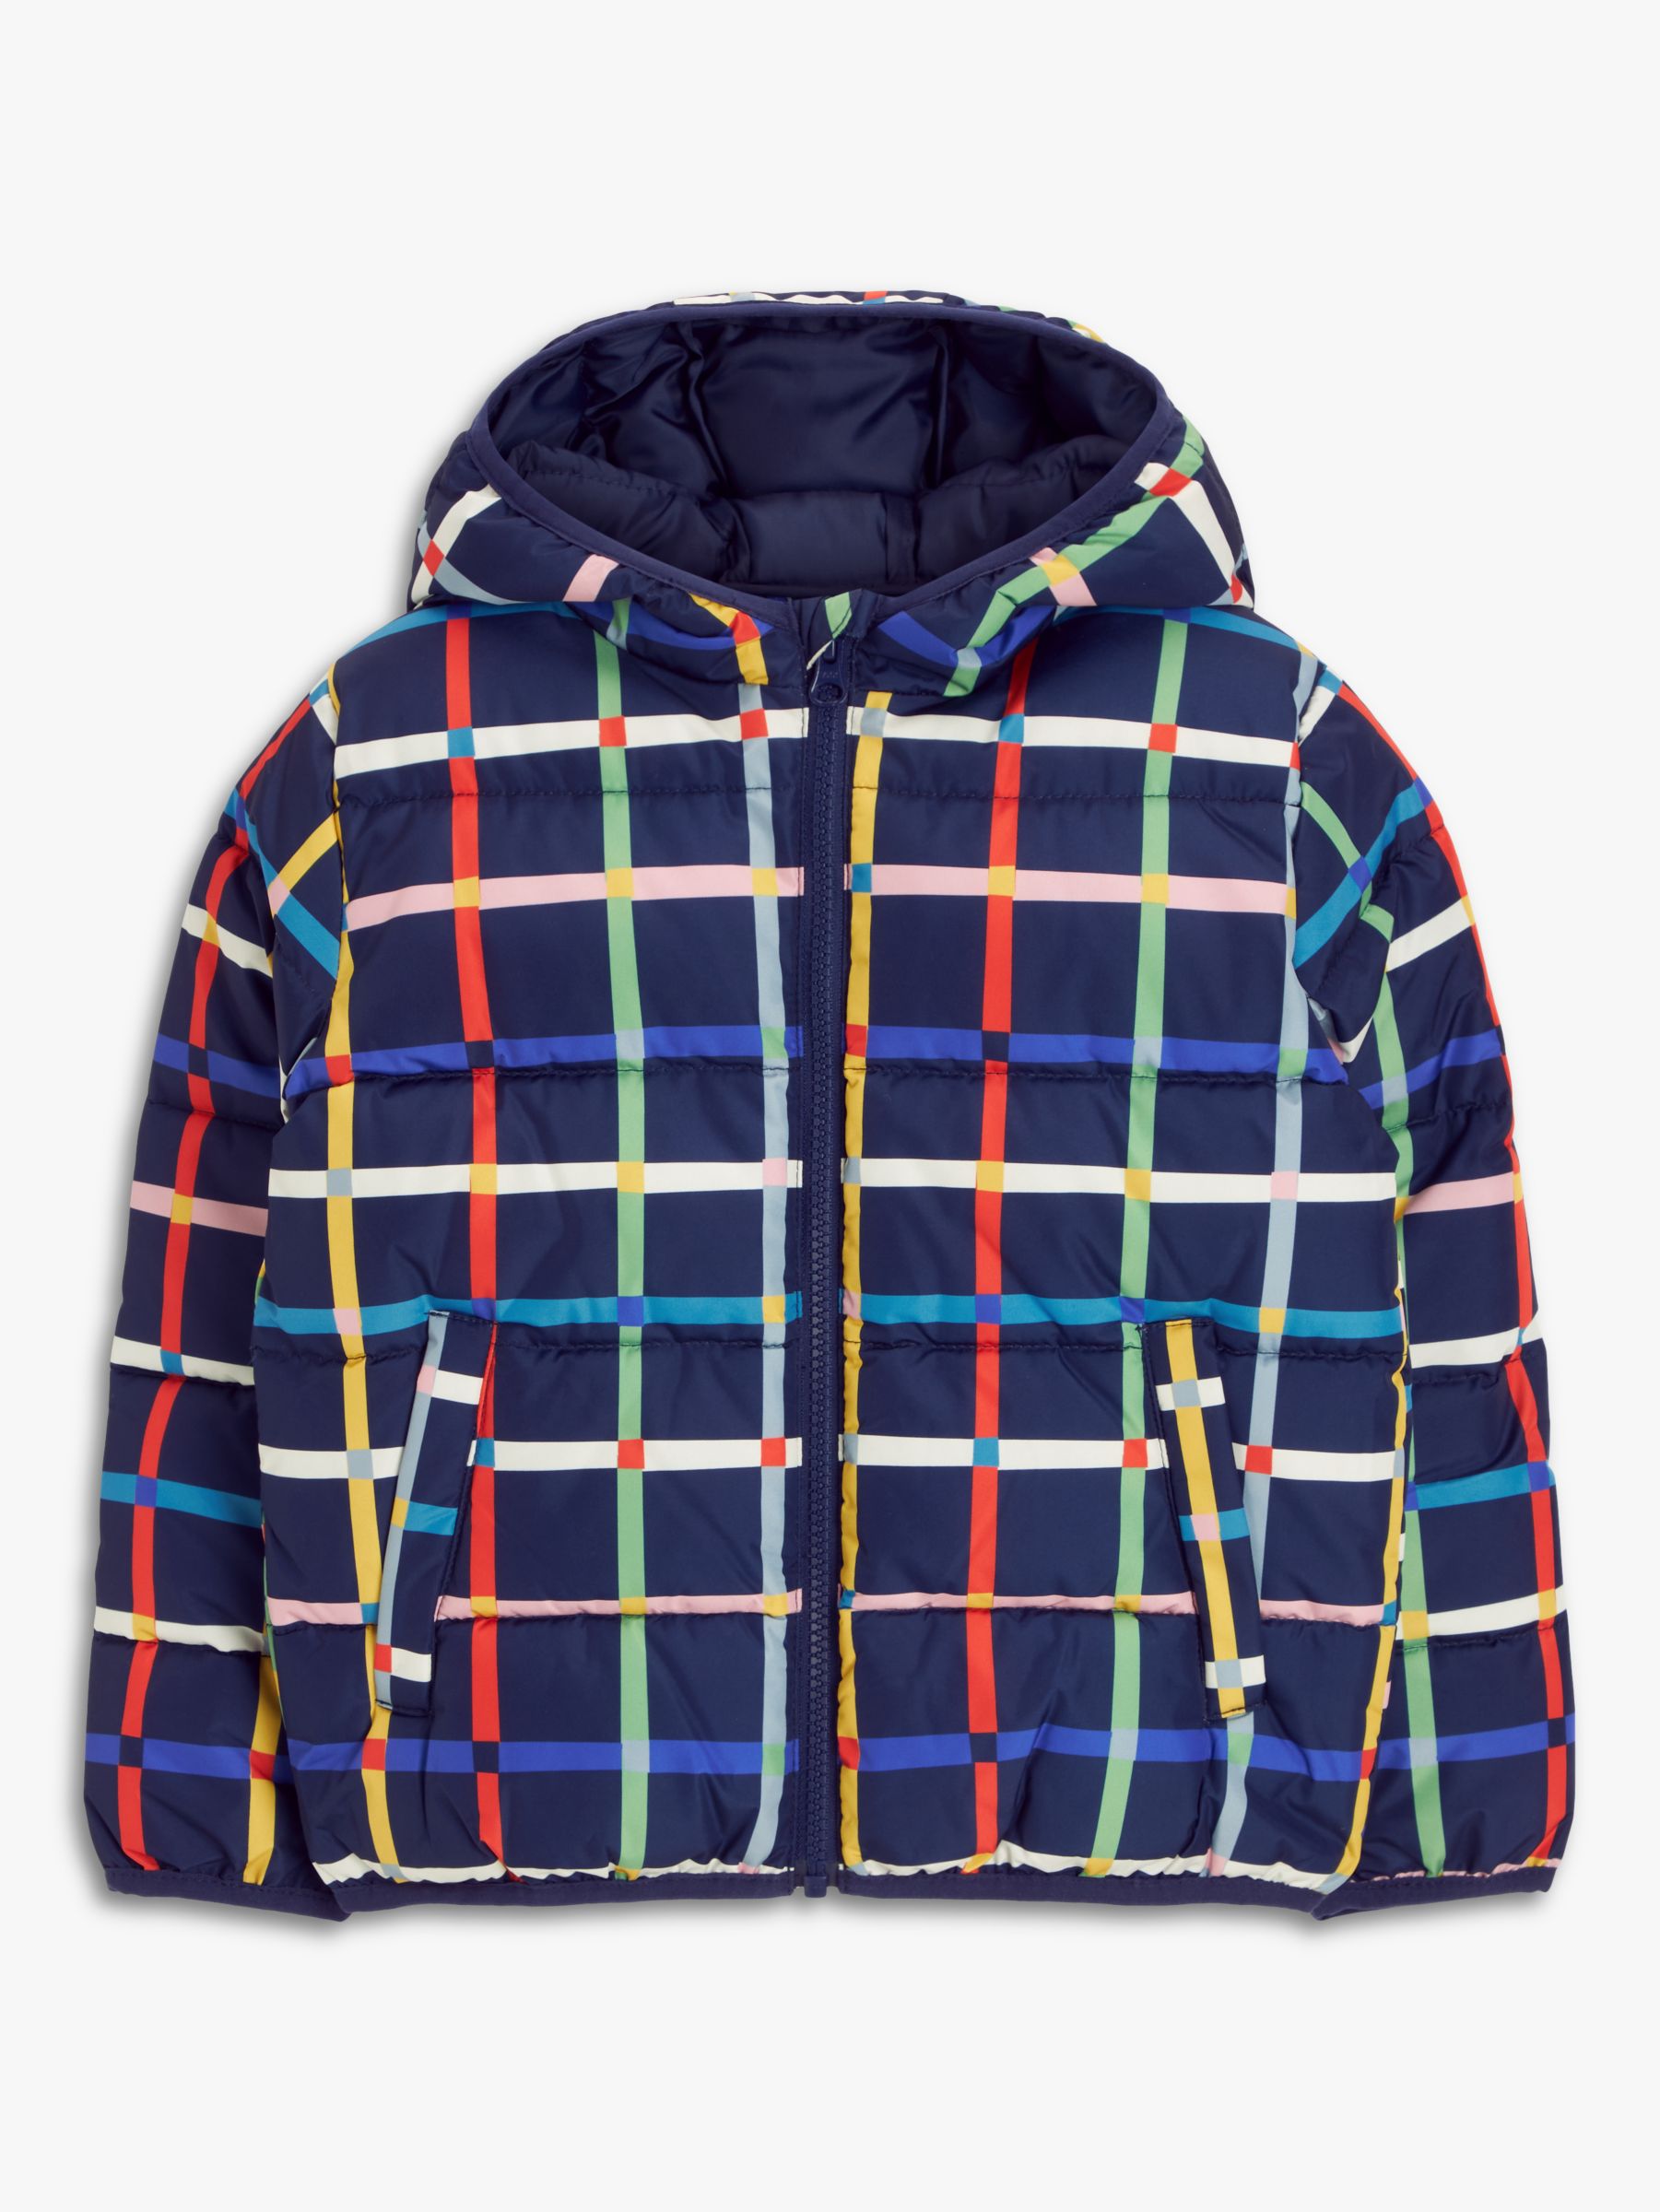 John Lewis ANYDAY Kids' Check Puffer Jacket, Medieval Blue